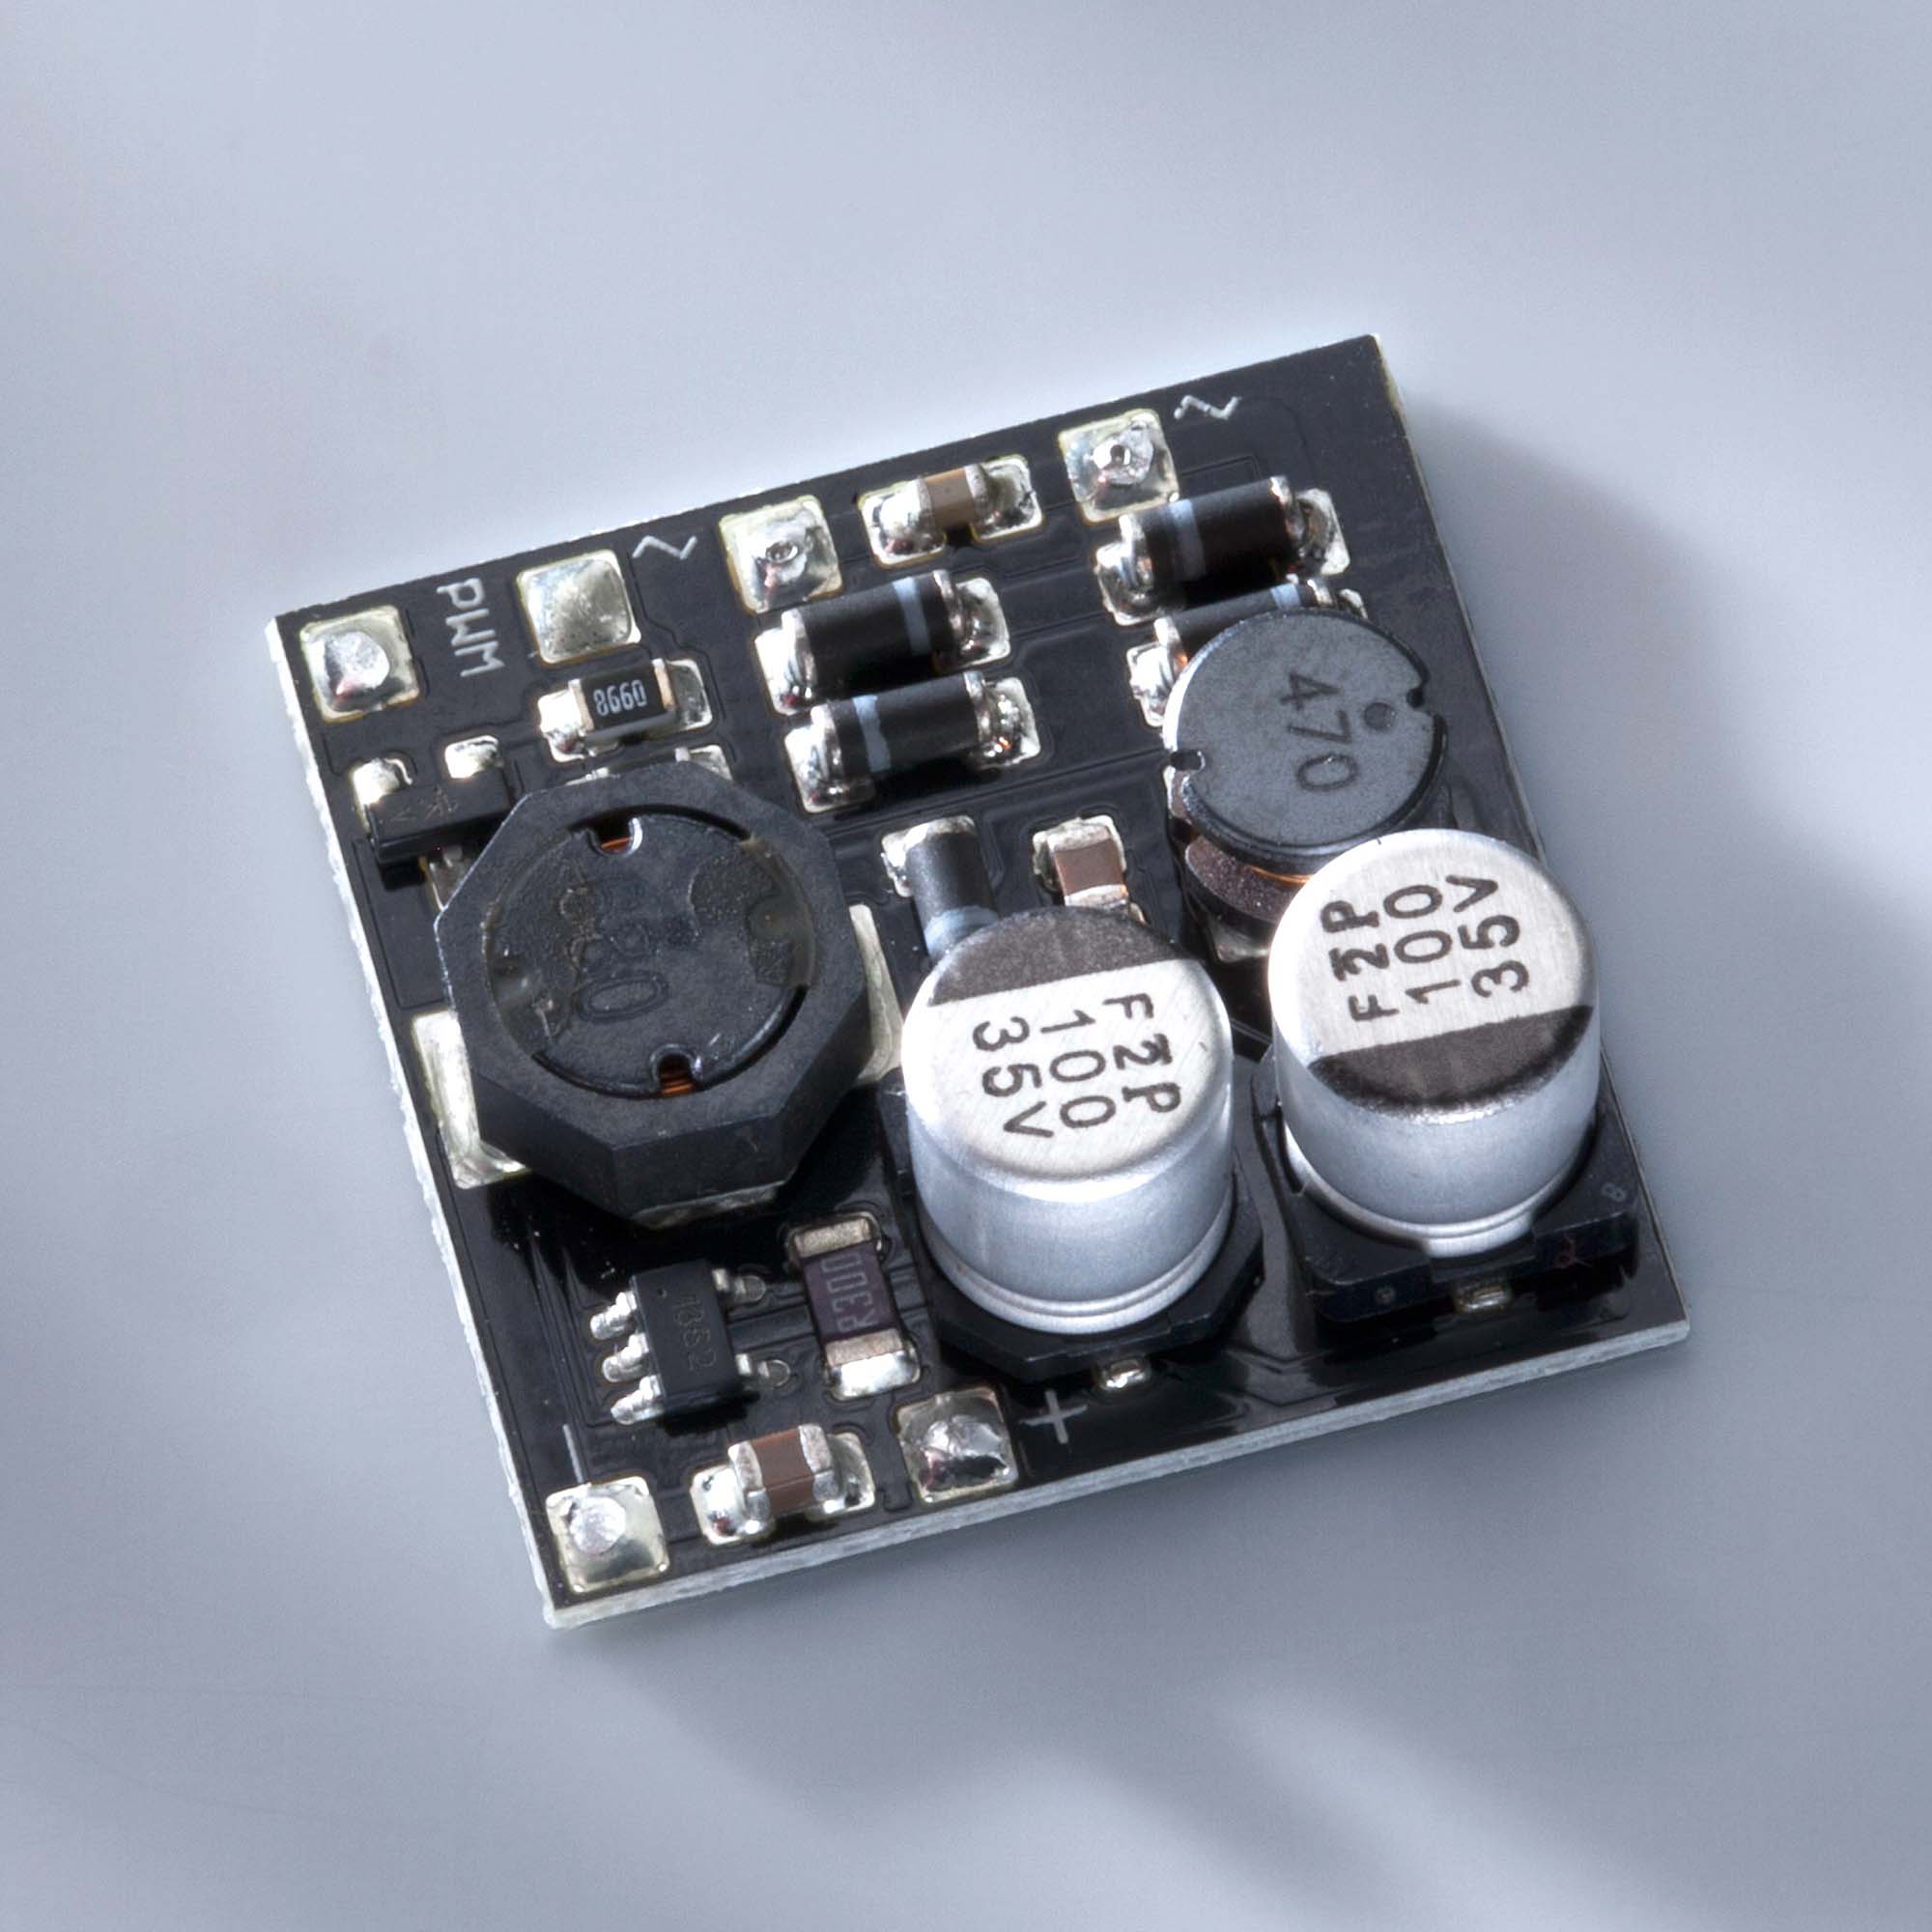 Constant current supply 500mA 6 - 35 VDC Input